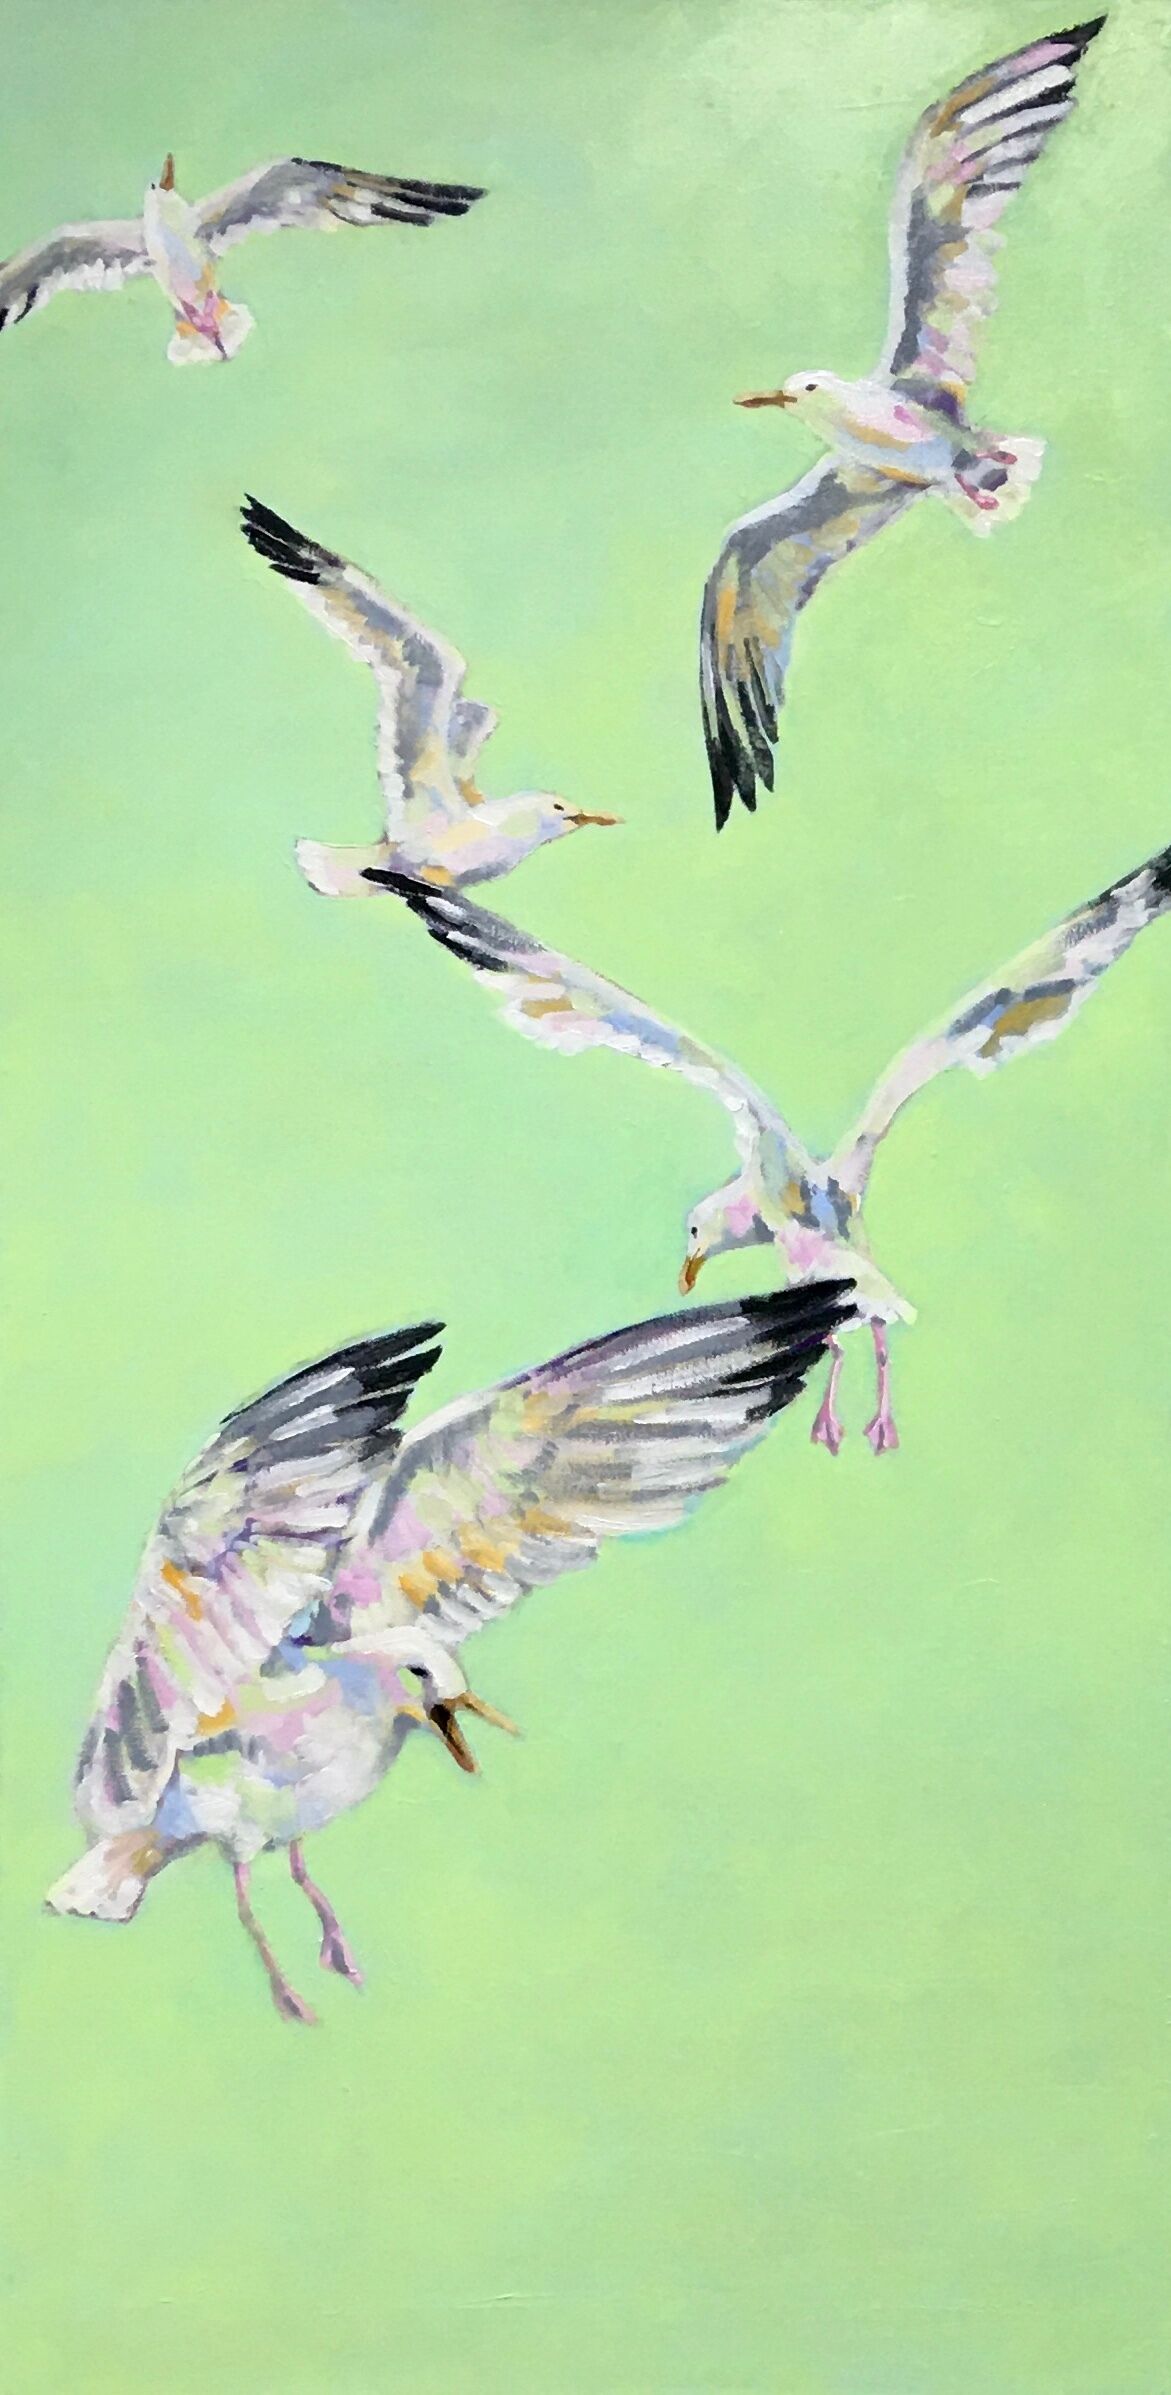 Picture "Flying high (seagulls)" (2020)